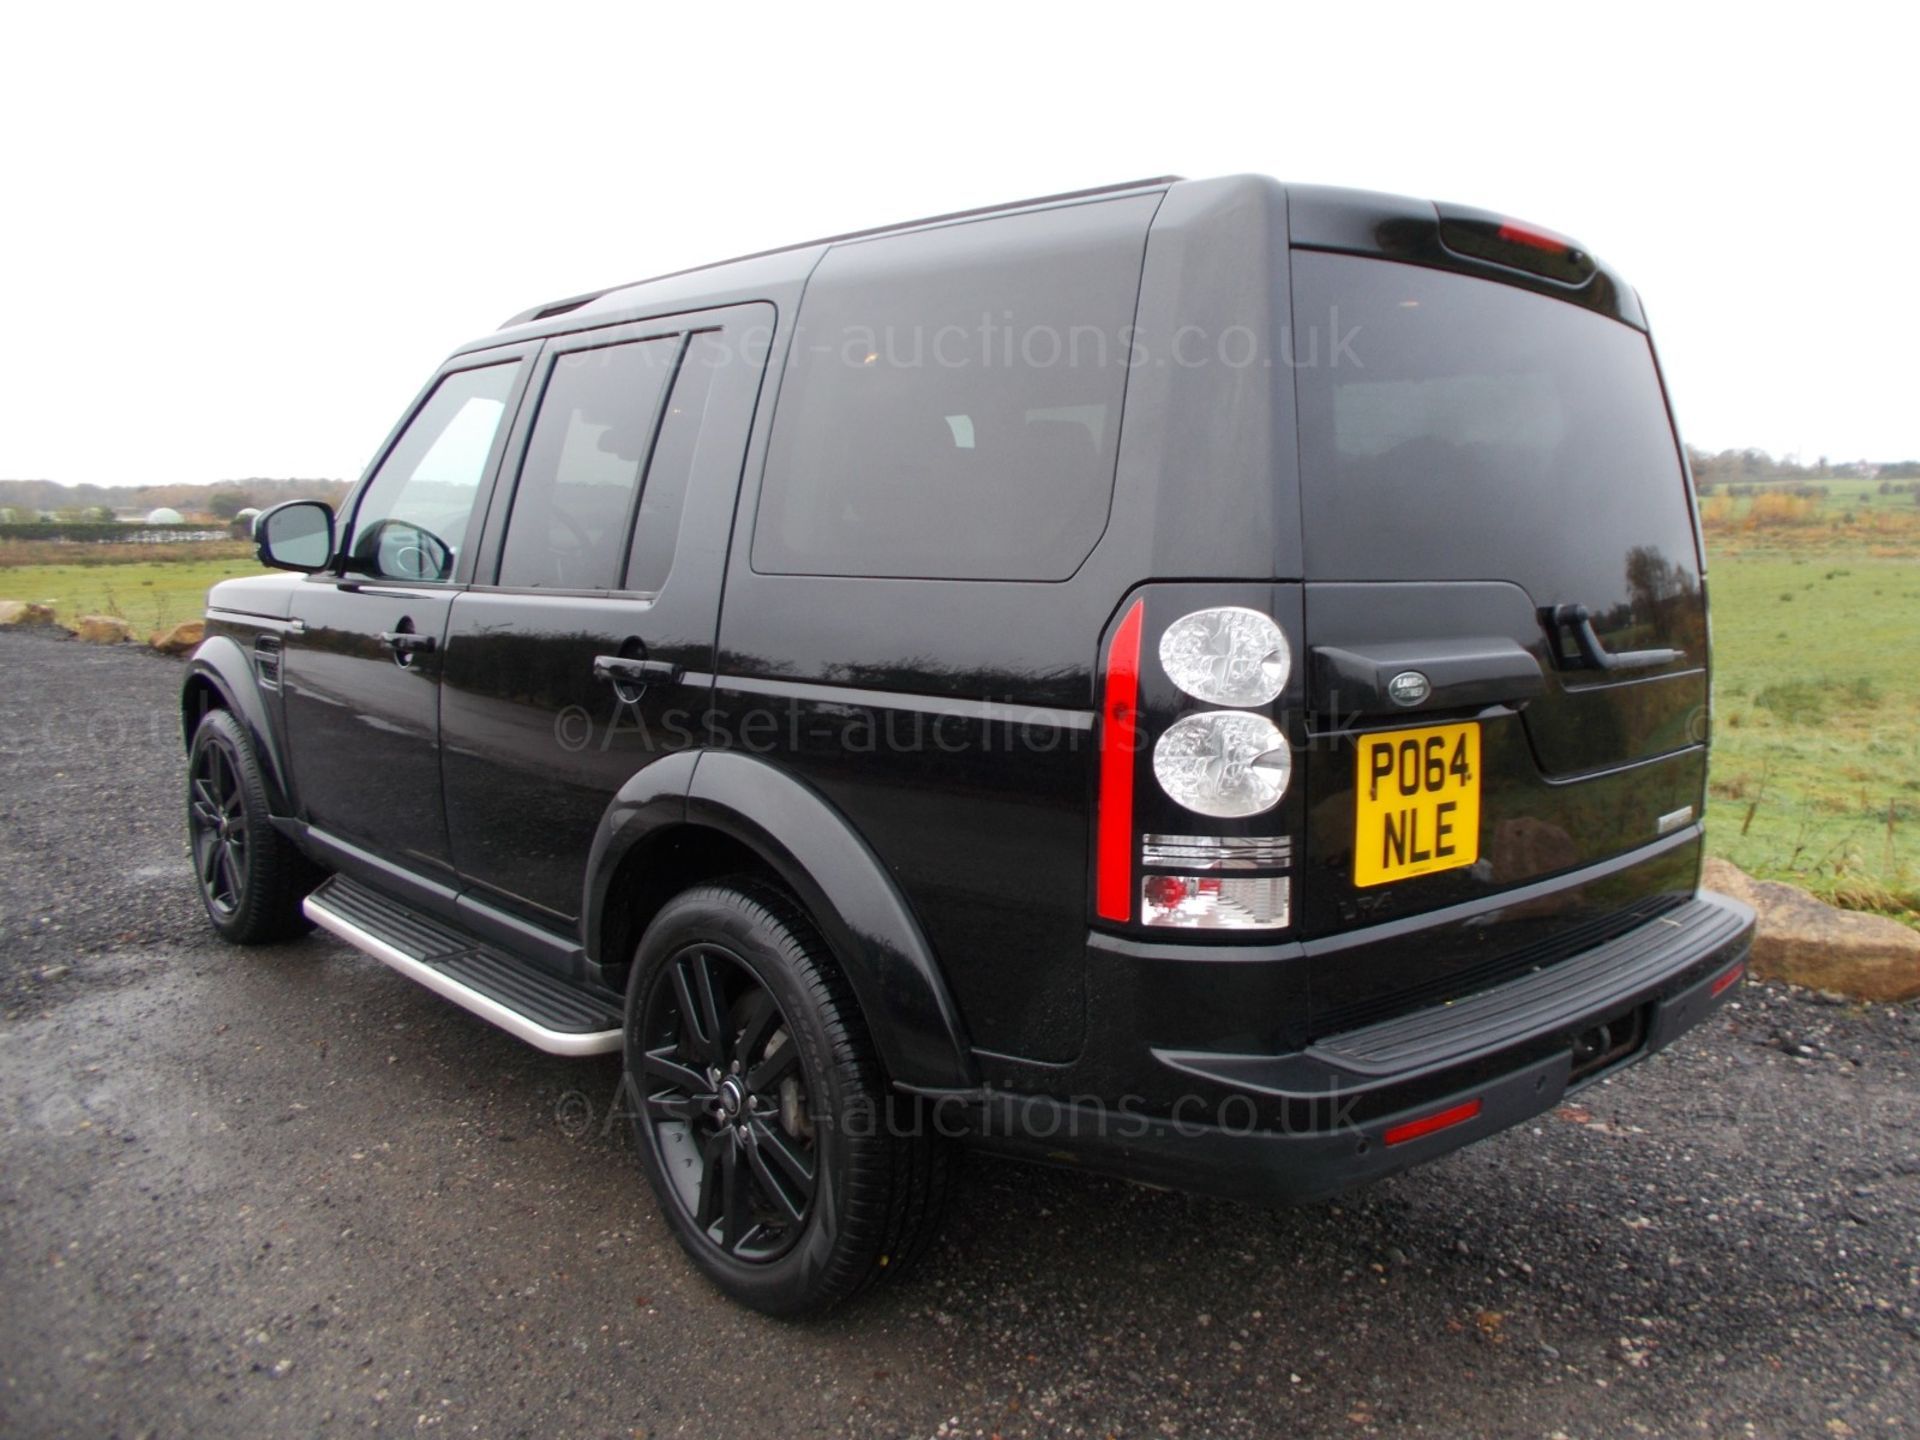 2015/64 LAND ROVER DISCOVERY HSE LUXURY SCV6 7 SEATER, 3.0 V6 PETROL SUPERCHARGED *NO VAT* - Image 5 of 27